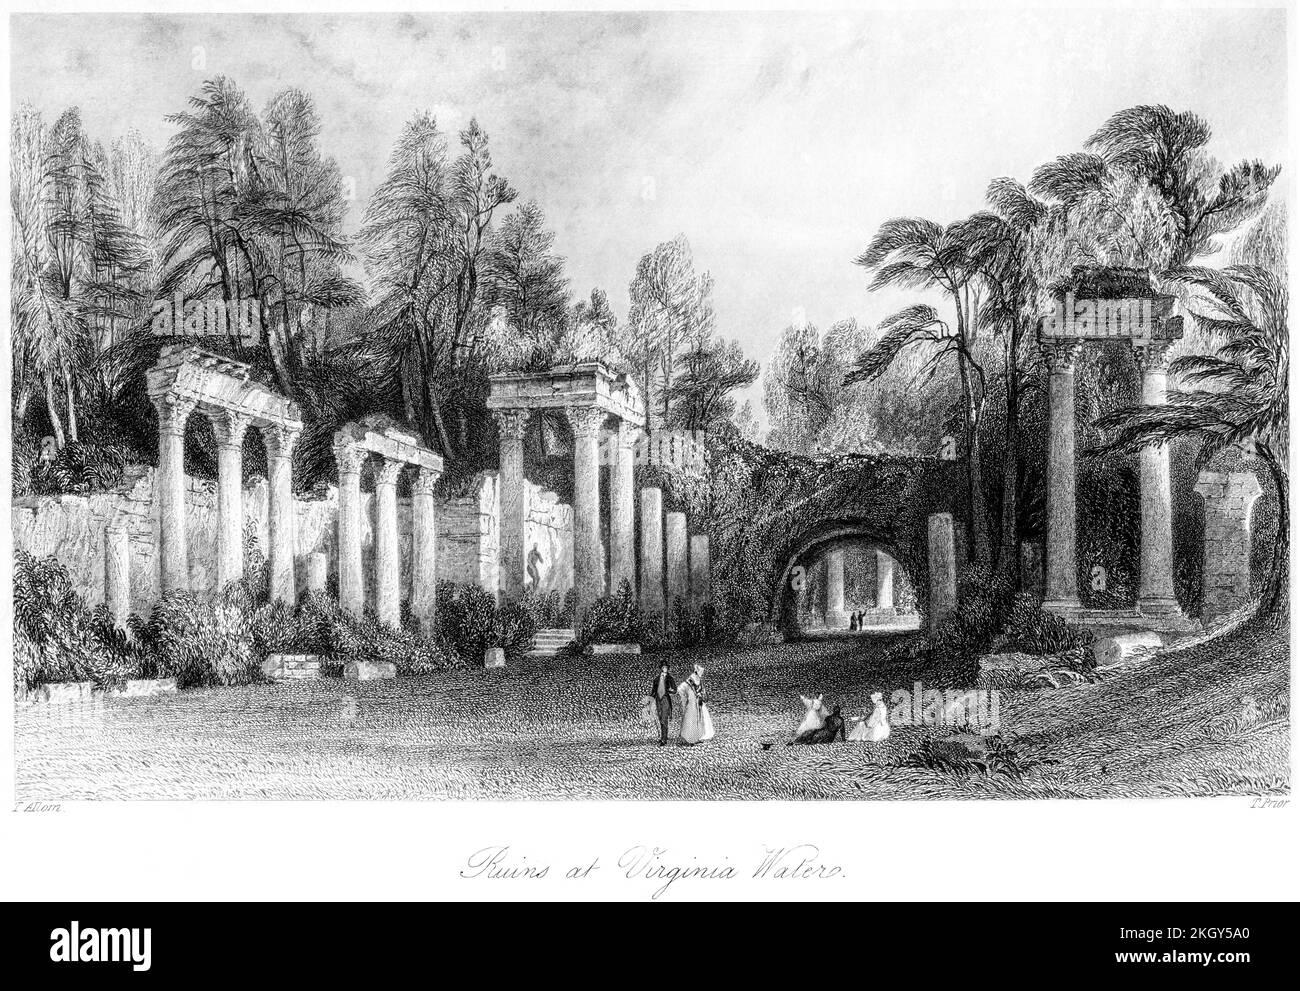 An engraving of the Leptis Magna Ruins at Virginia Water, Surrey UK scanned at high resolution from a book printed in 1850. Believed copyright free. Stock Photo